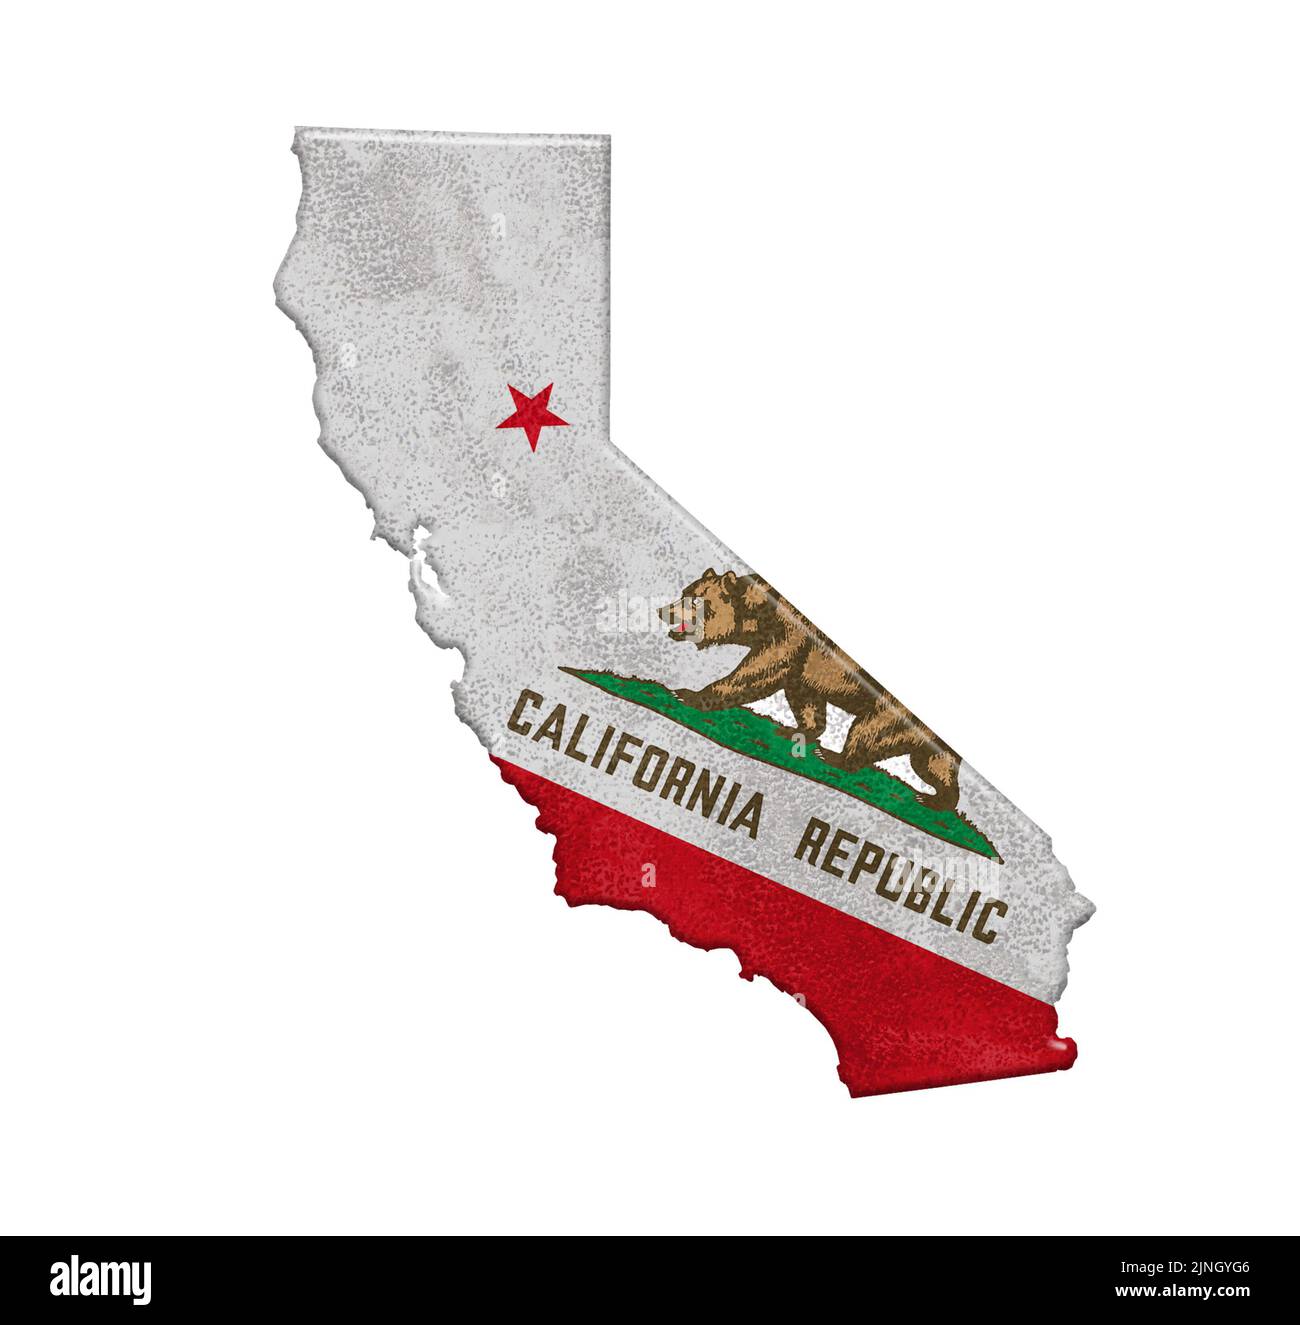 State of California flag and map, USA Stock Photo